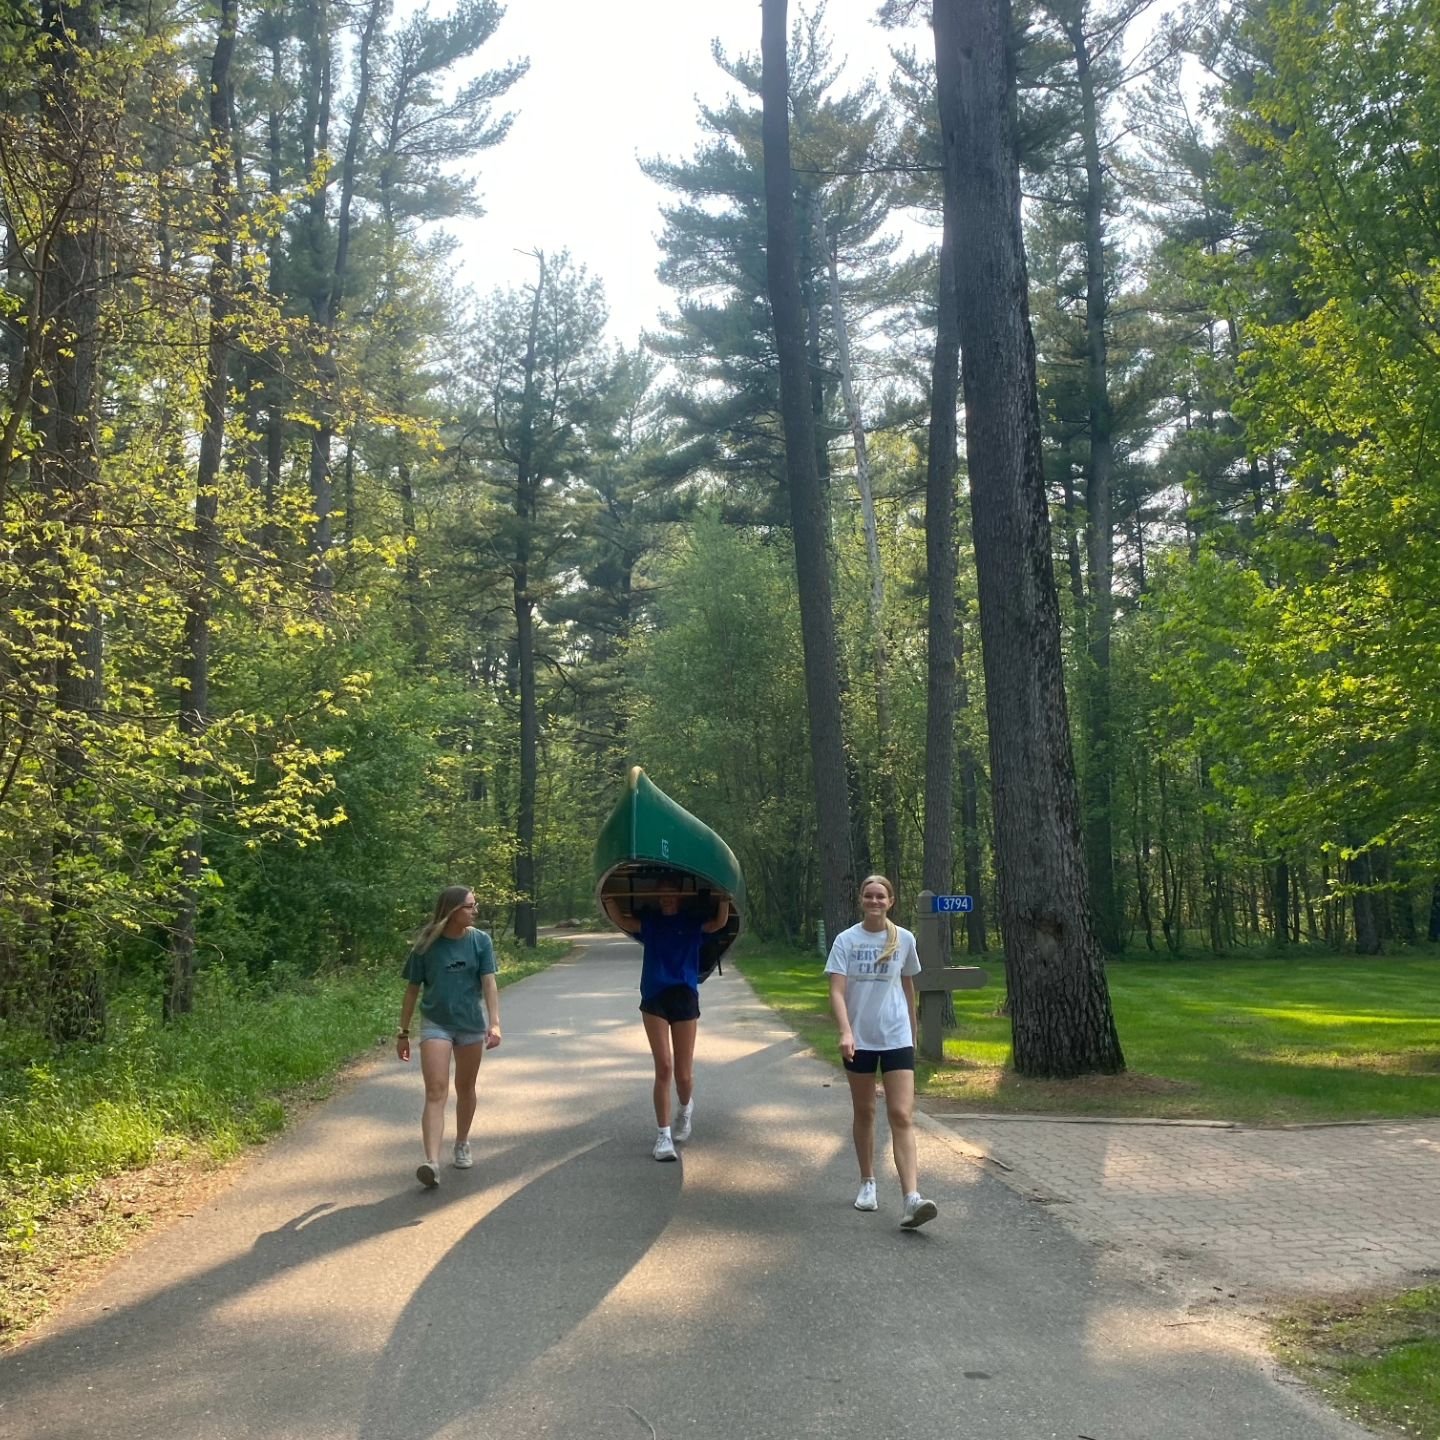 Things are starting to heat up!☀️☀️

The sun is out, and so are this summer's Voyageur crews! One of the first things a Voyageur learns is how to flip and portage a canoe - a skillful and challenging task that takes some serious practice and patience